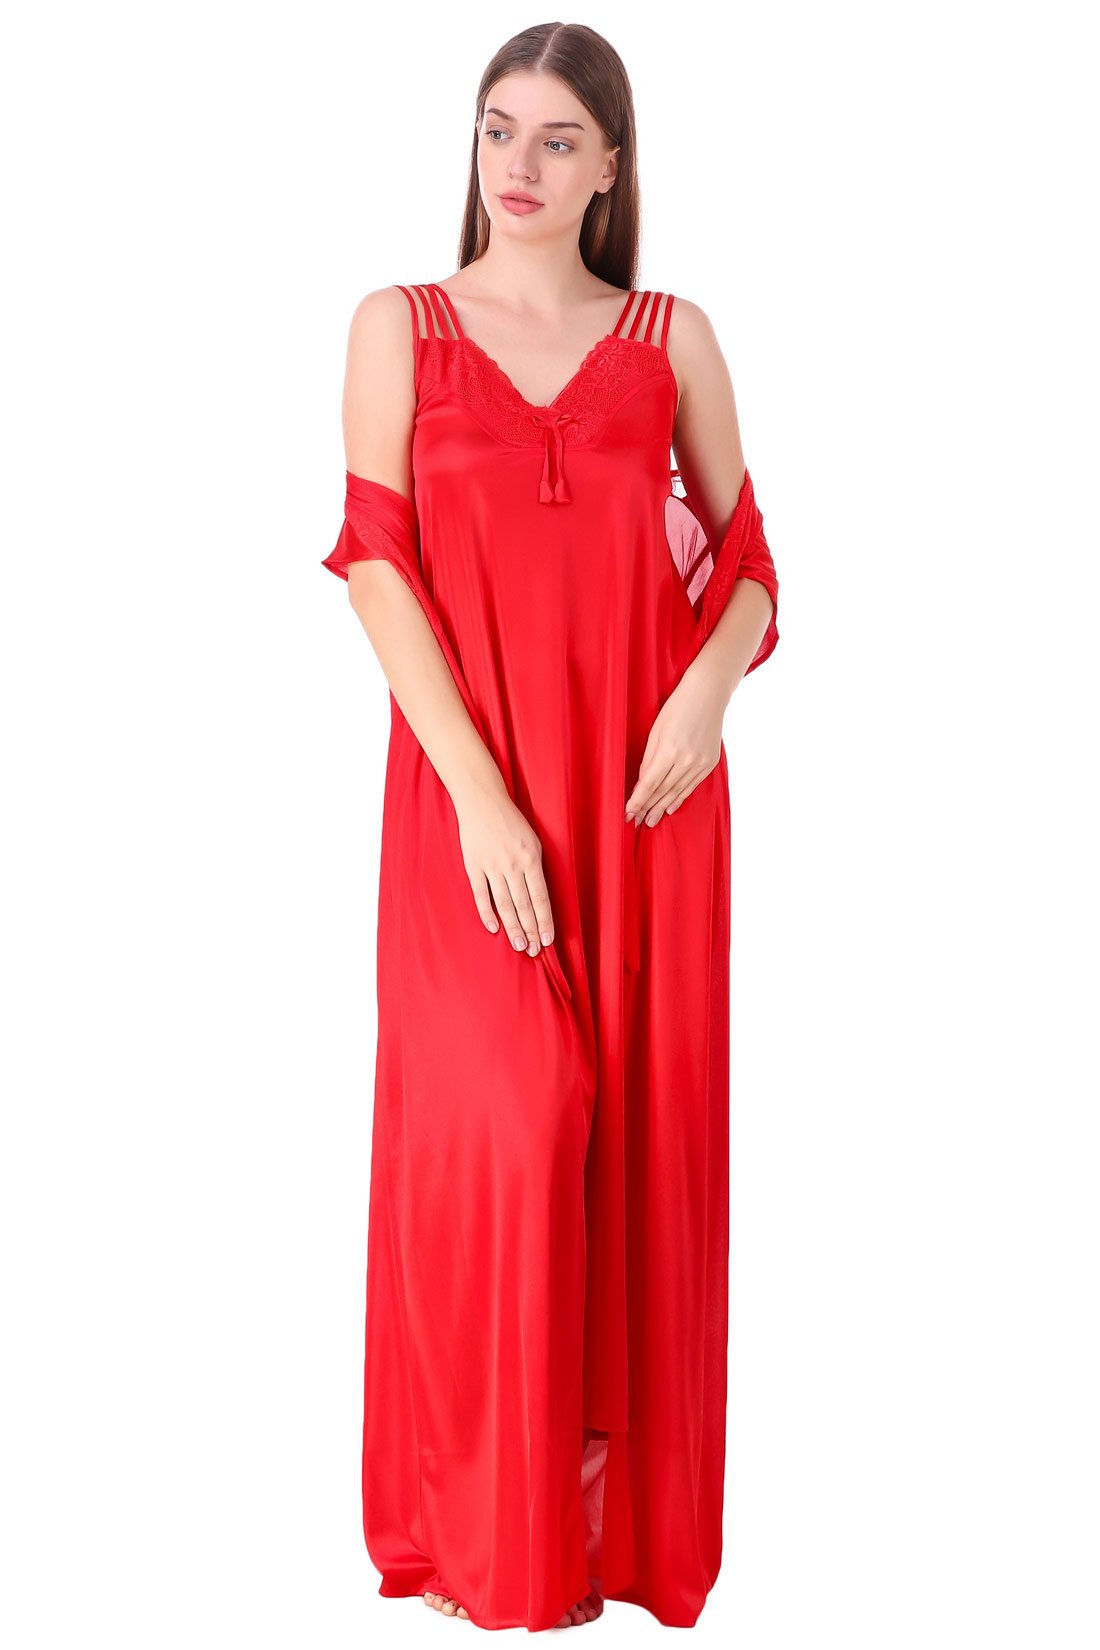 Red / One Size Chloe Satin Gown Nightwear Set The Orange Tags